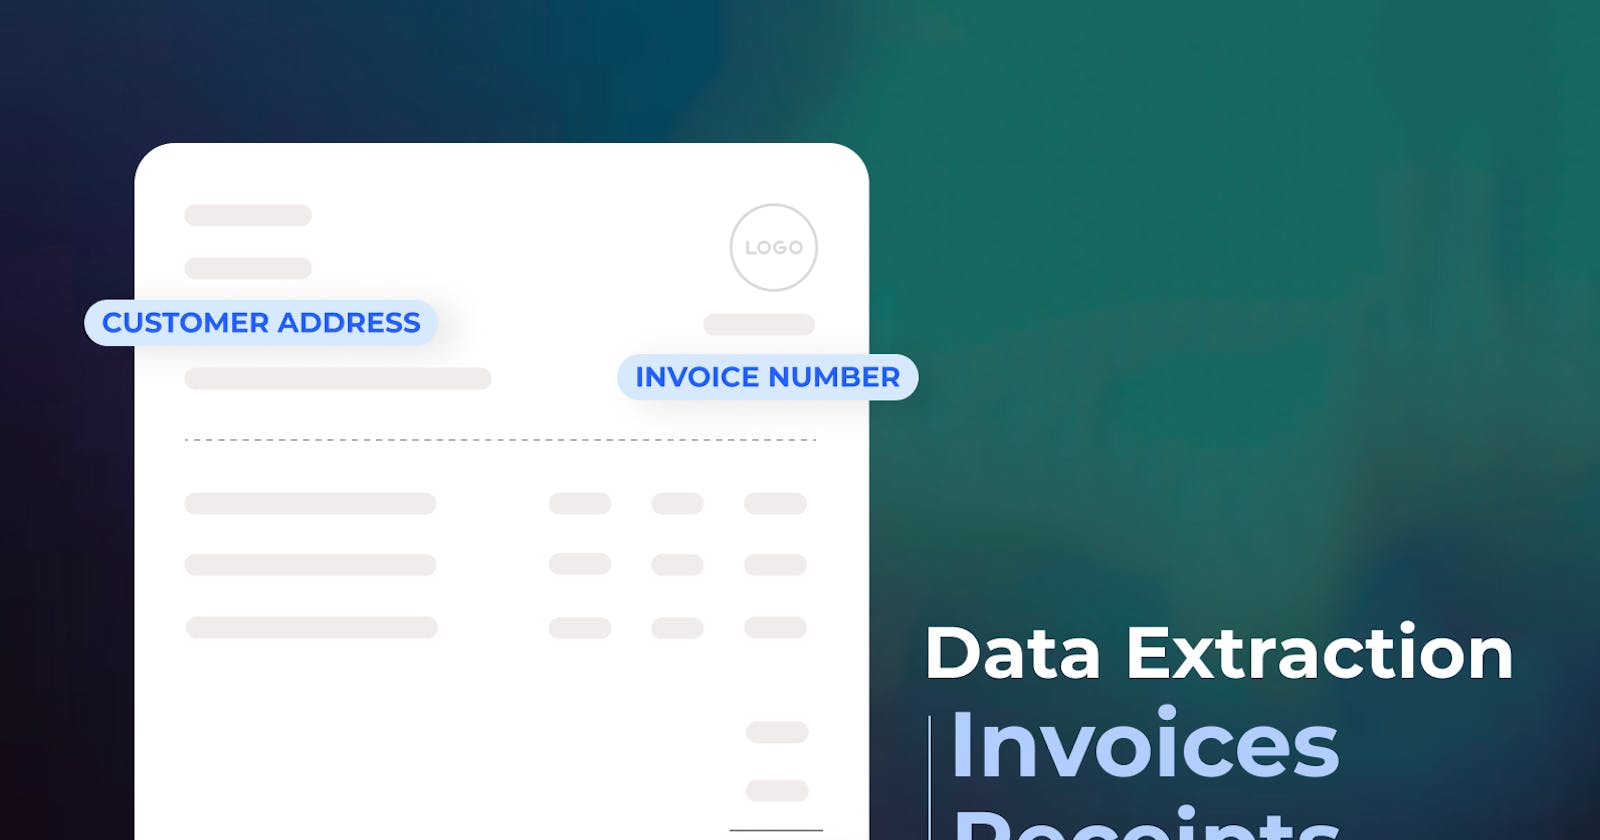 How to extract data from invoices or receipts?